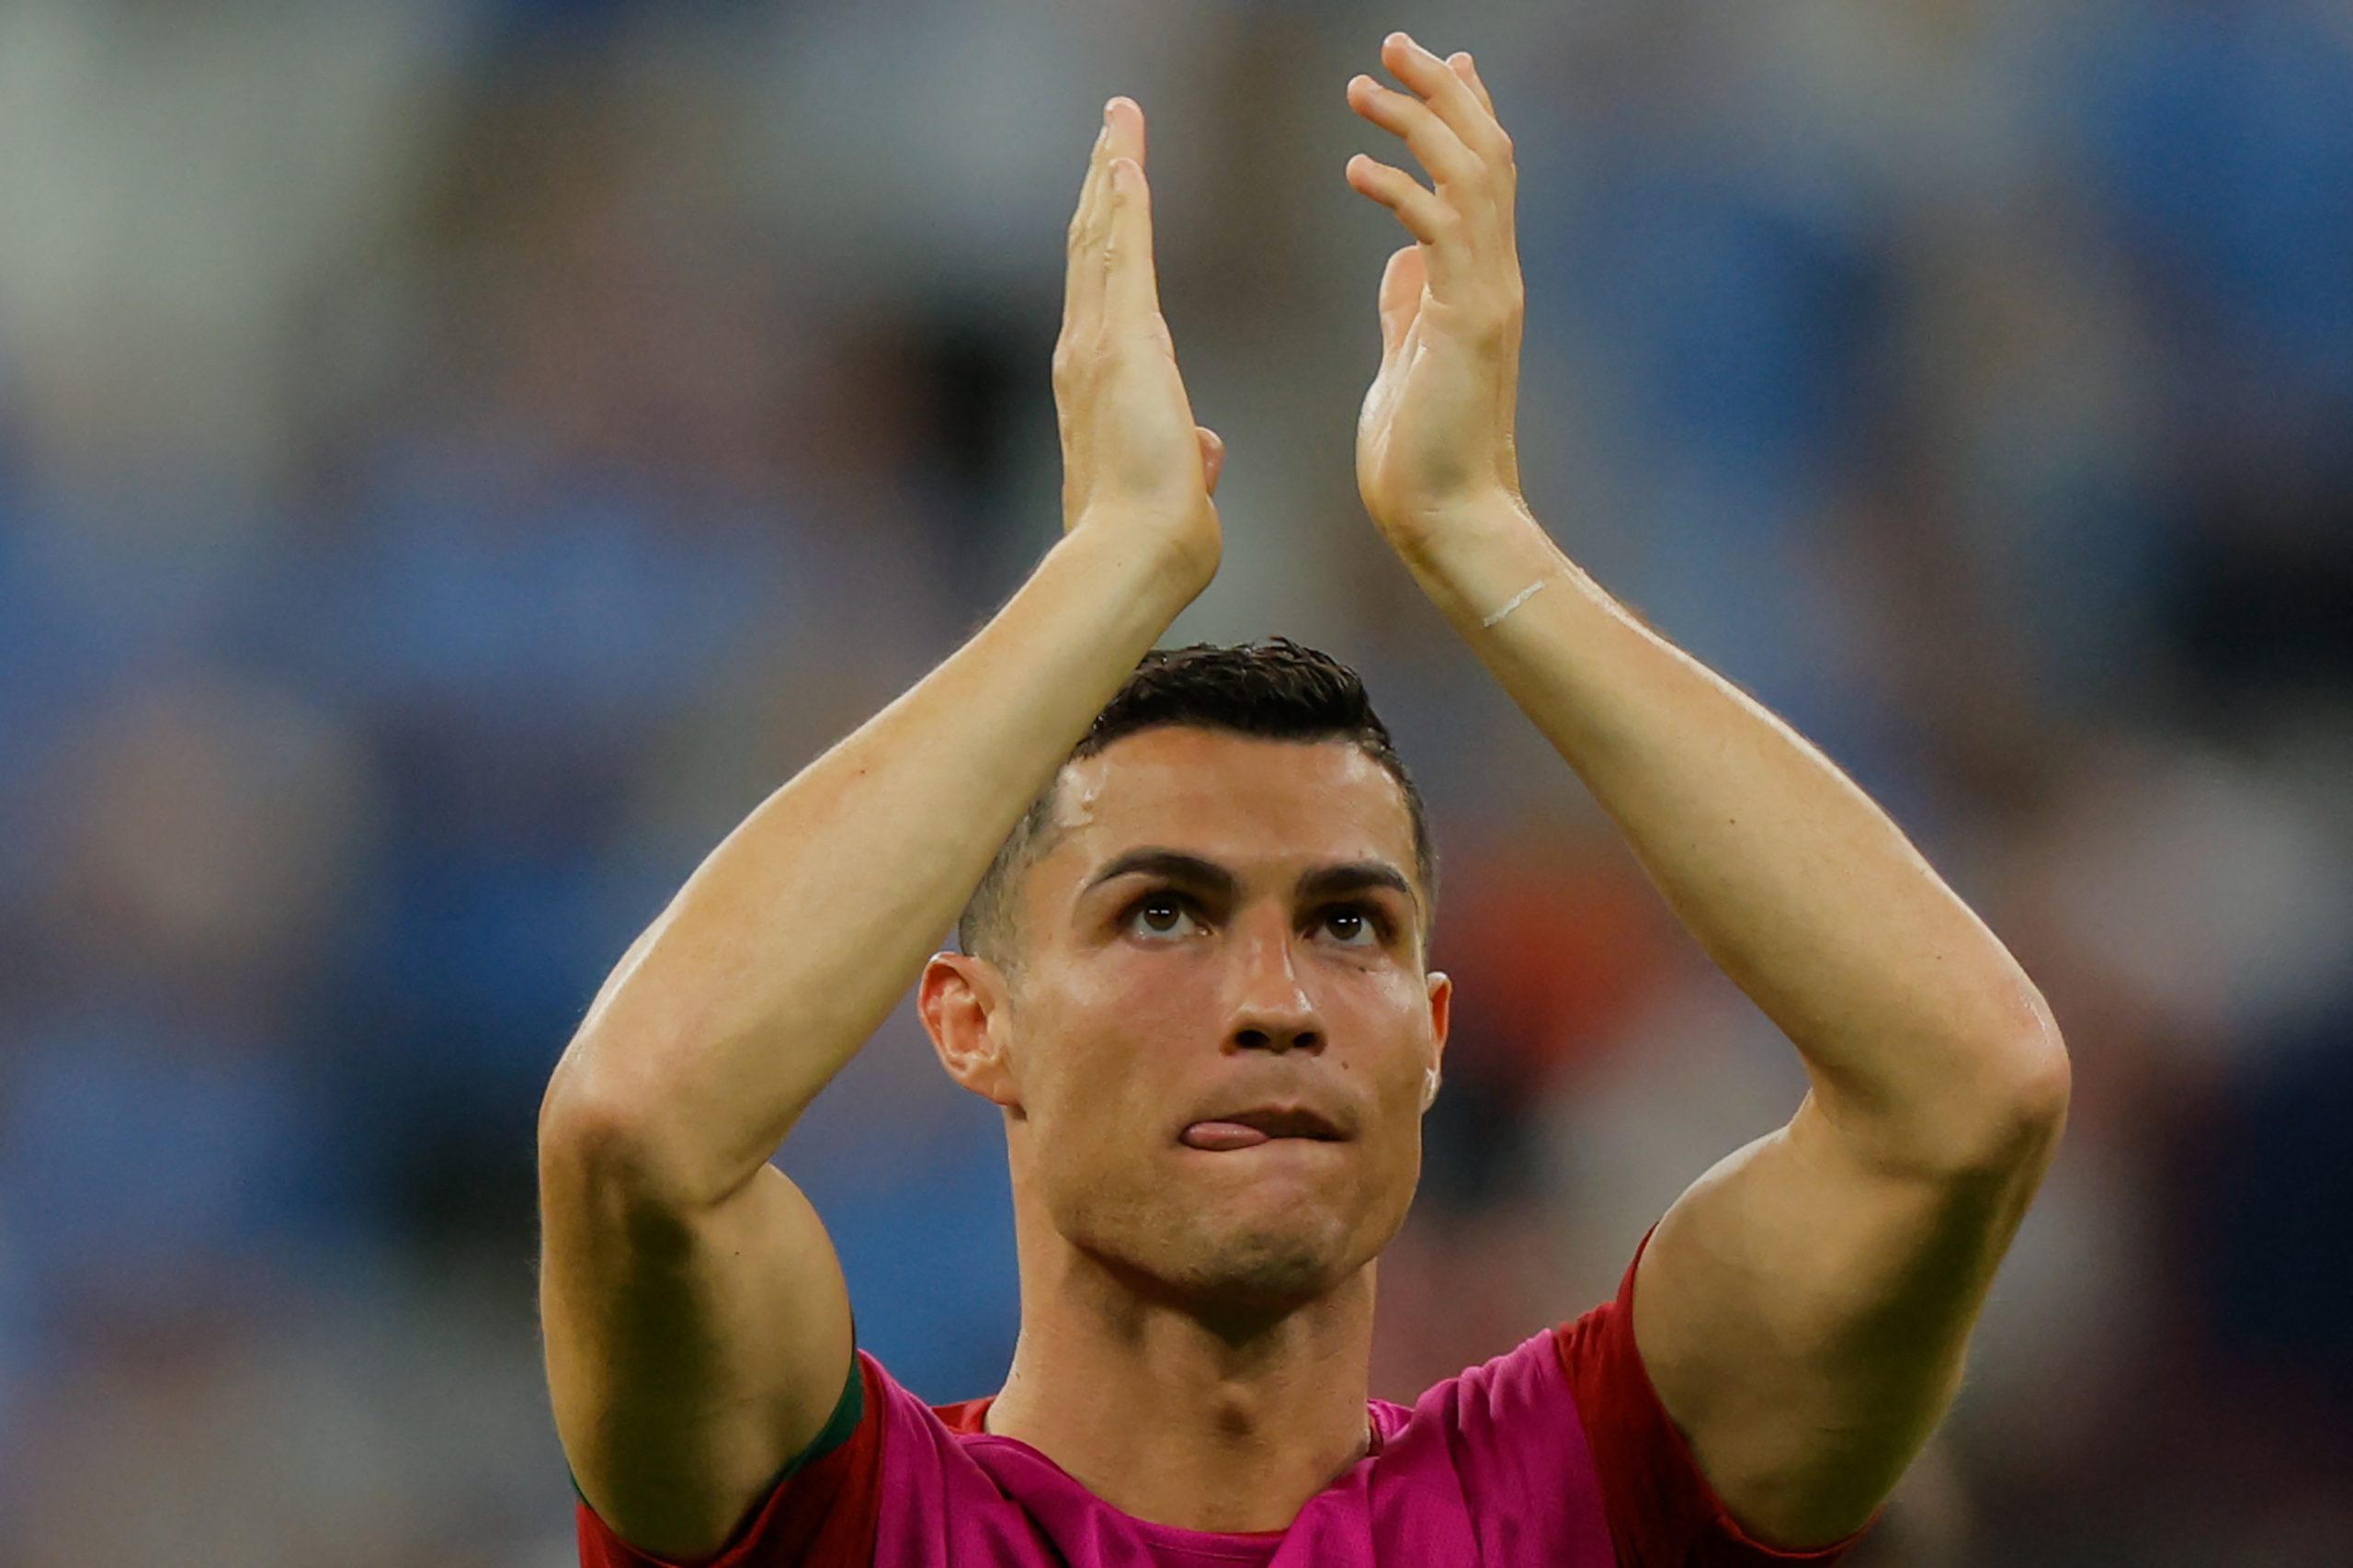 Portugal's forward #07 Cristiano Ronaldo applauds supporters after his team won the Qatar 2022 World Cup Group H football match between Portugal and Uruguay at the Lusail Stadium in Lusail, north of Doha on November 28, 2022